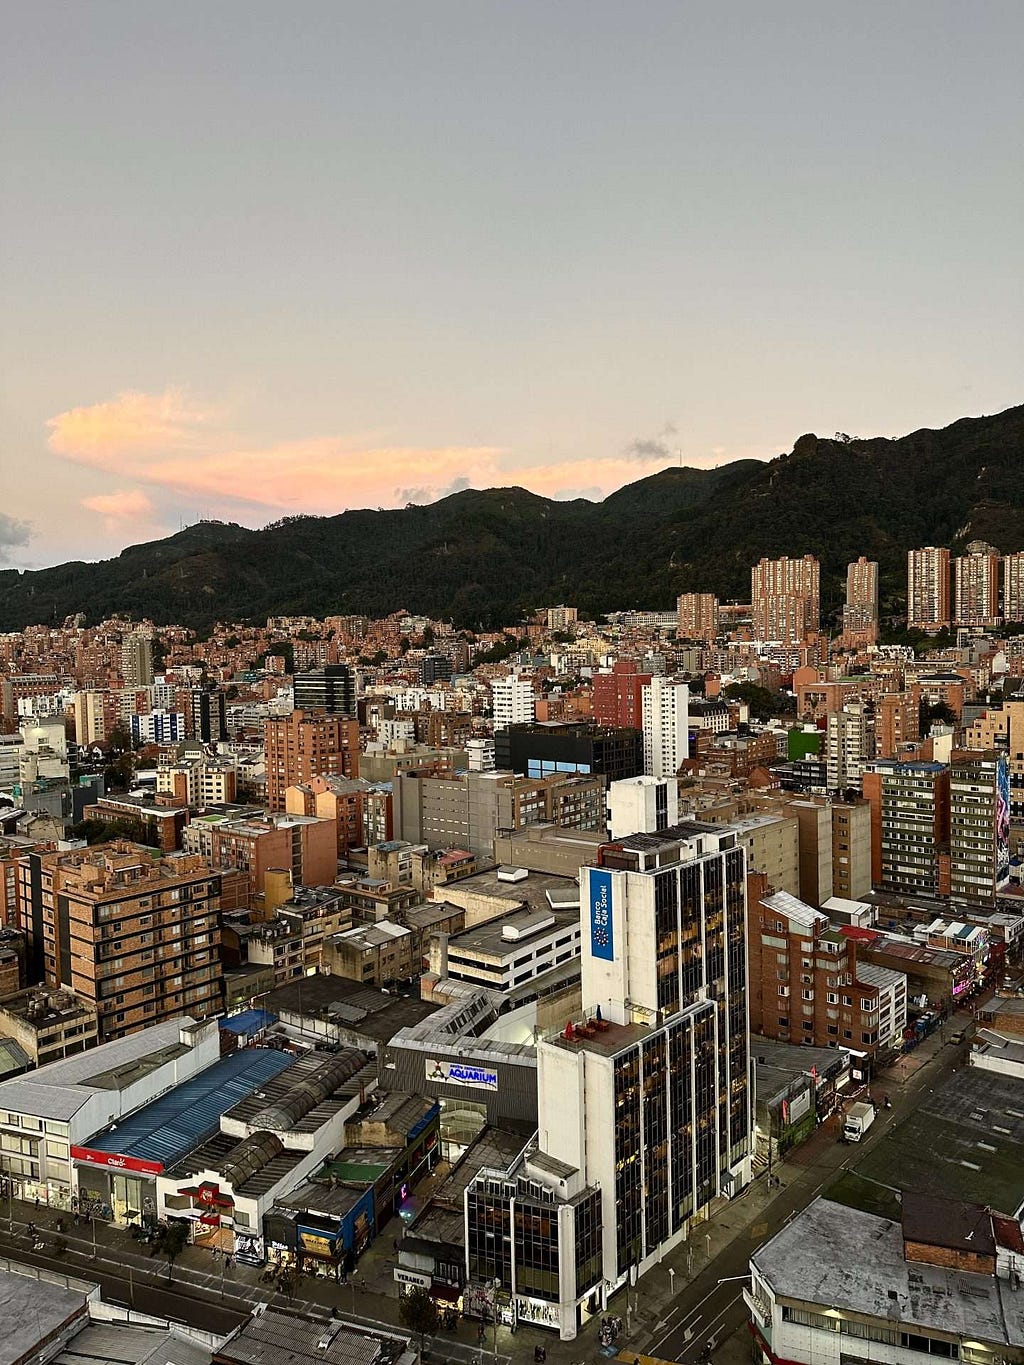 Aerial view of Bogota with numerous buildings, streets, and a backdrop of mountains during sunset.